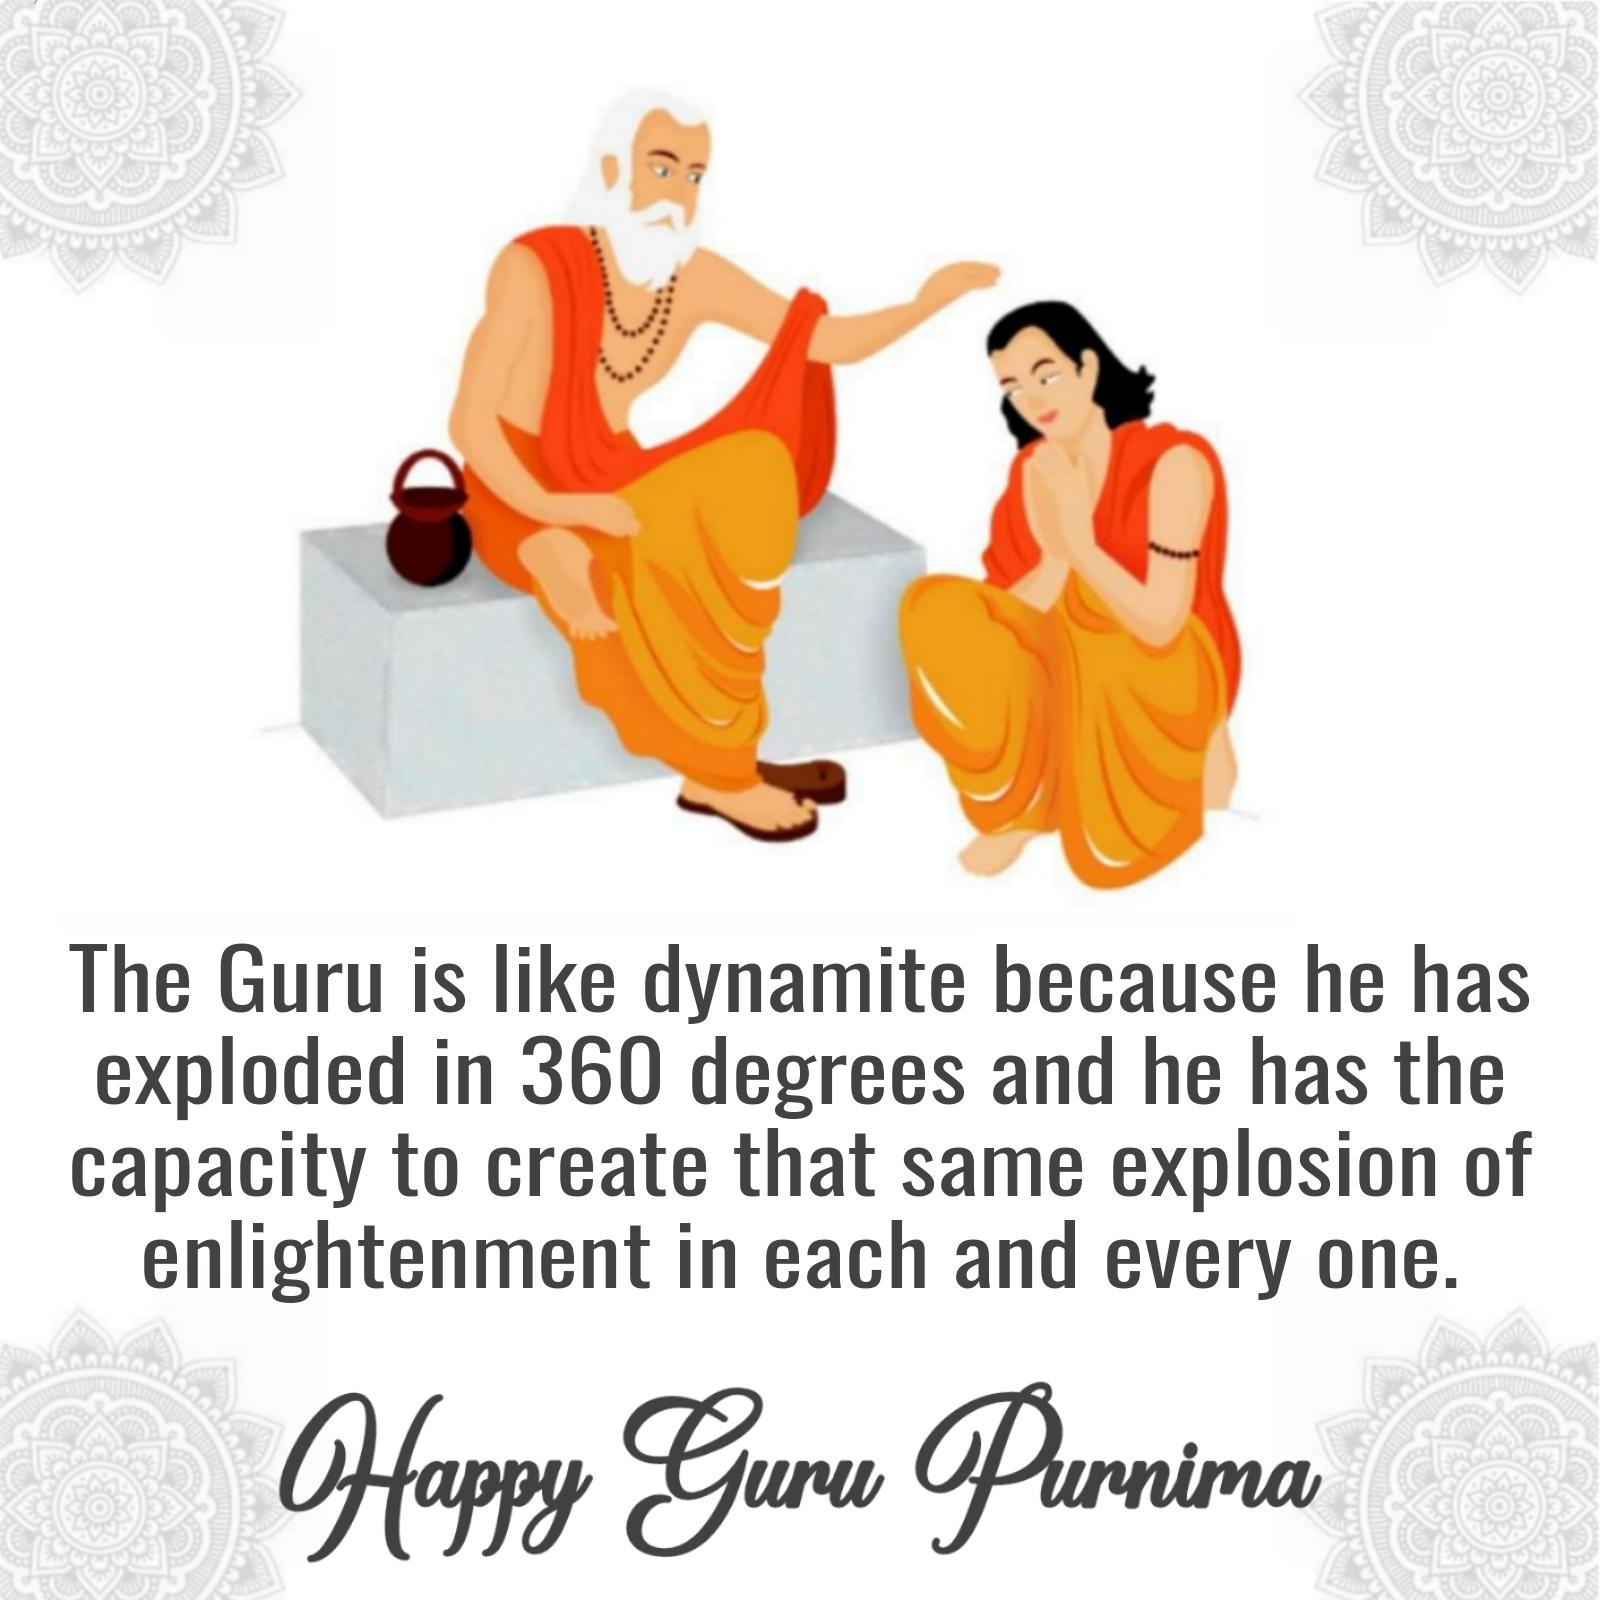 The Guru is like dynamite because he has exploded in 360 degrees